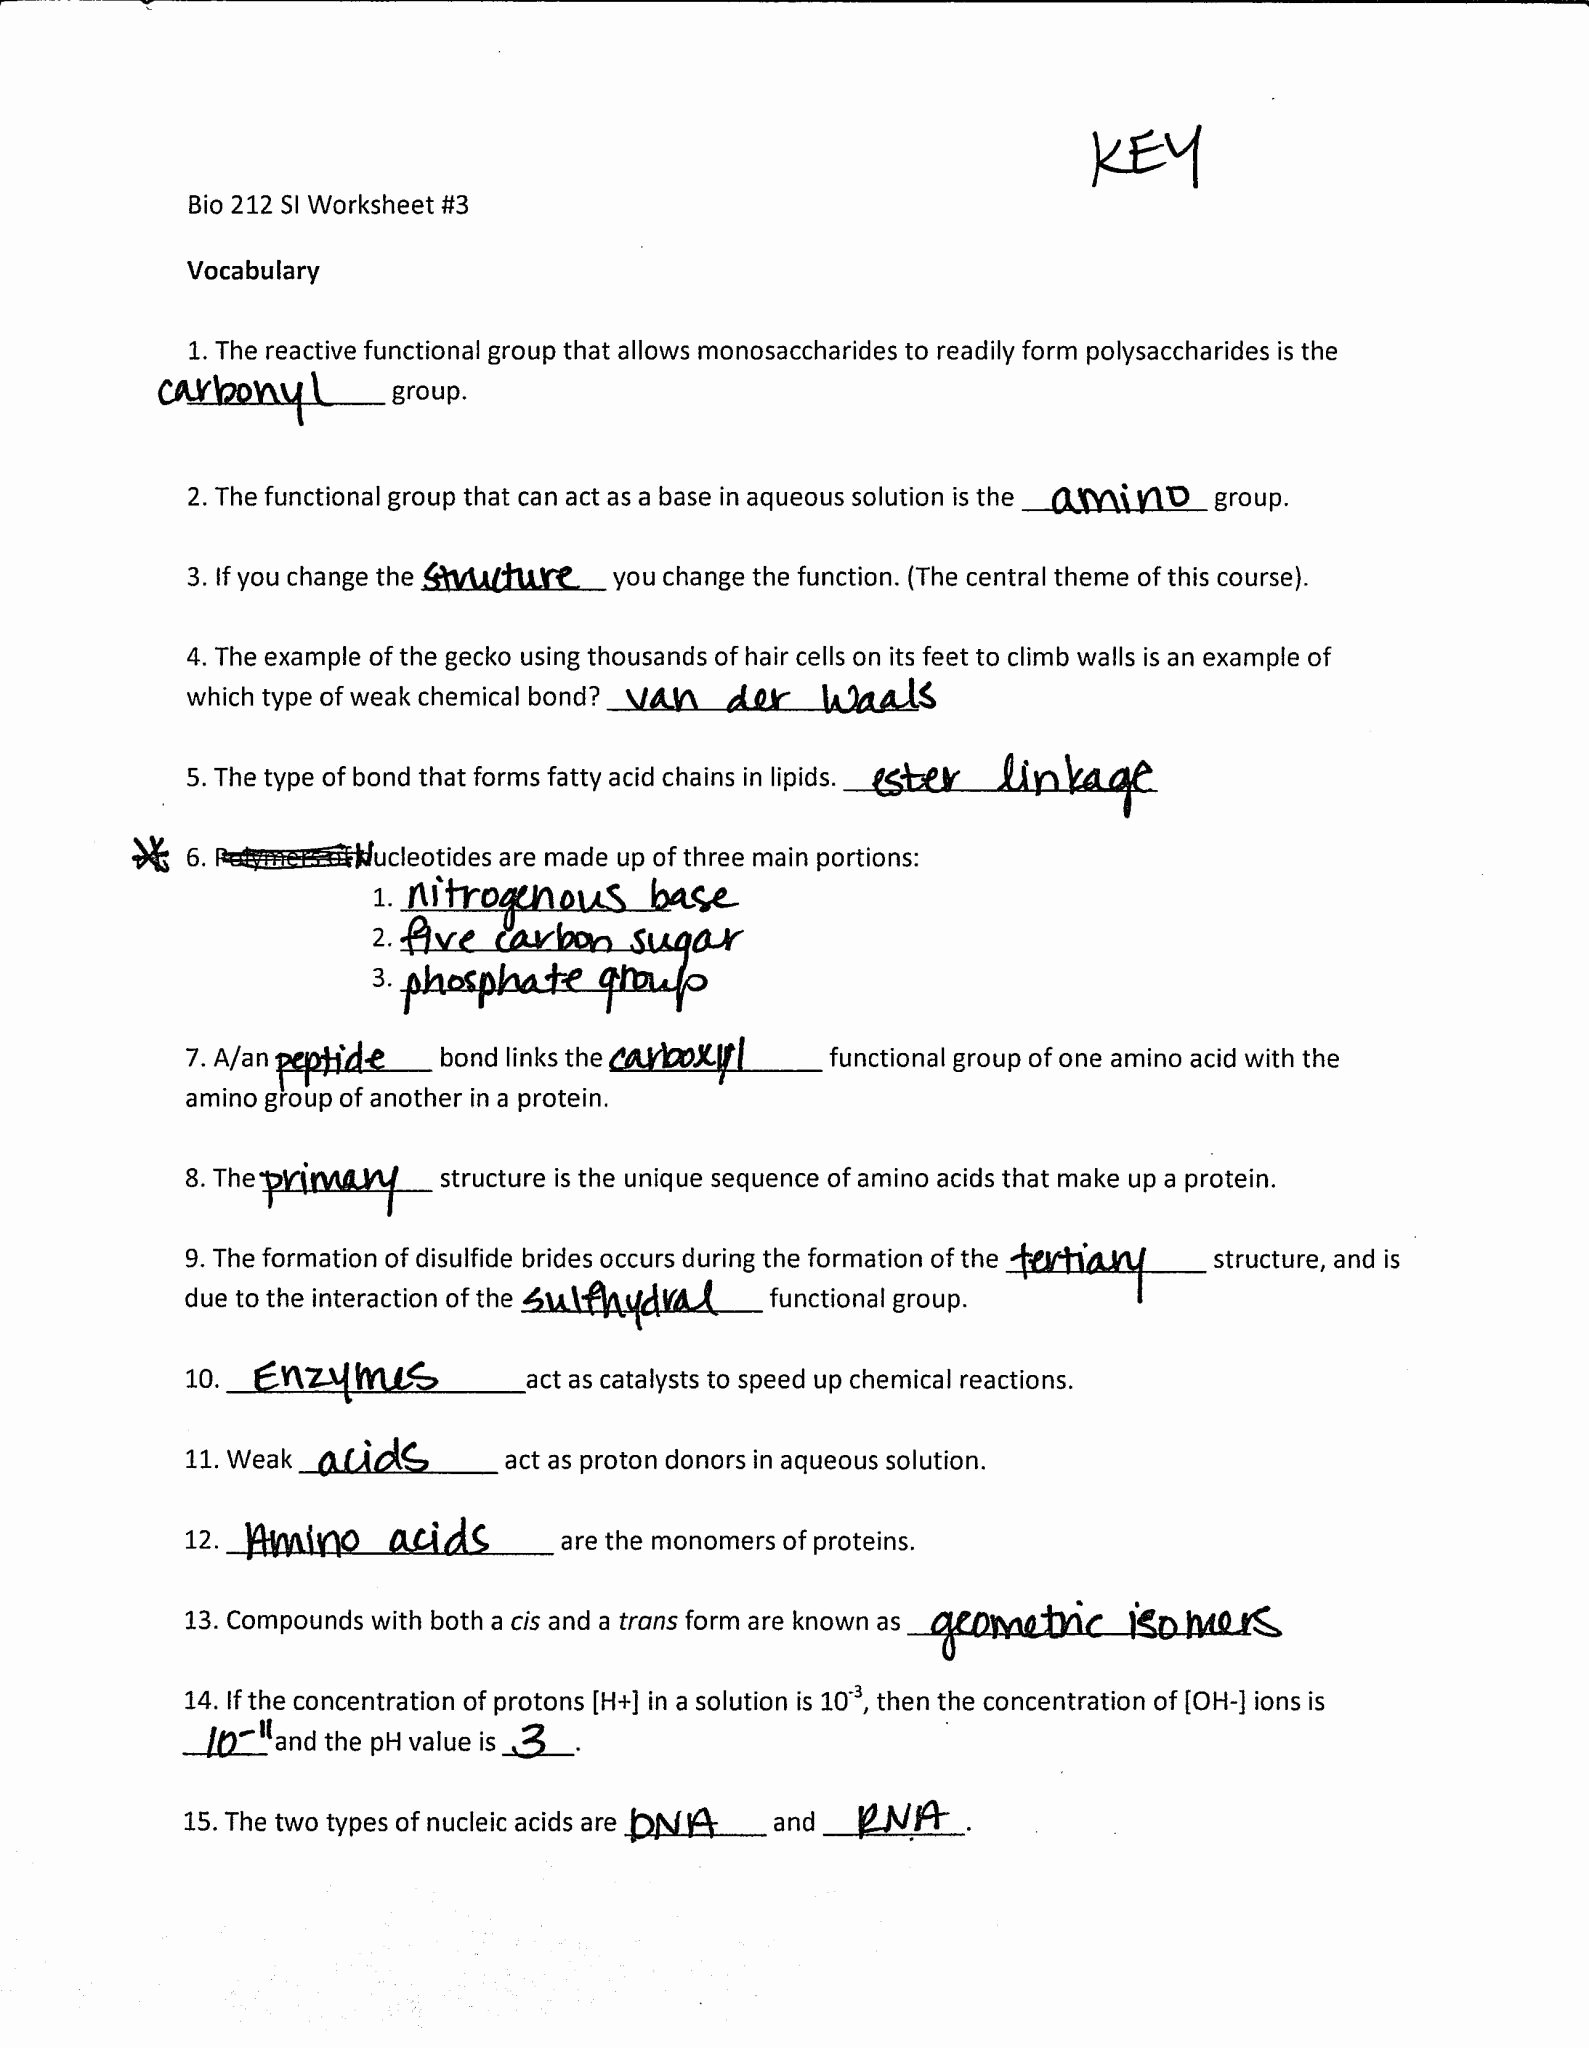 Dna and Replication Worksheet Answers Elegant Dna Replication Worksheet Answer Key